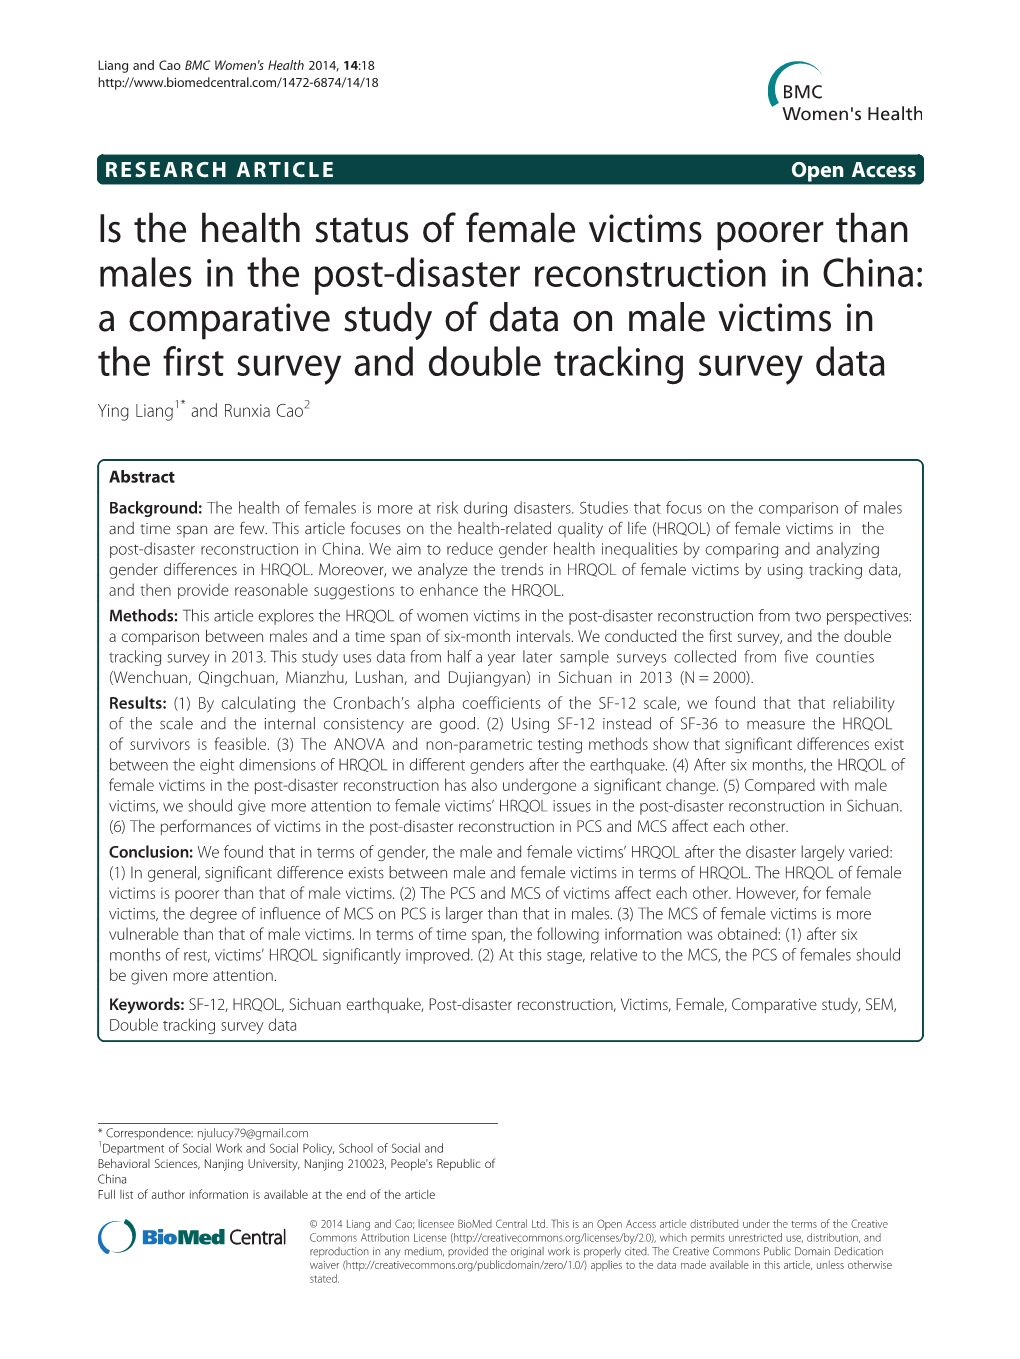 Is the Health Status of Female Victims Poorer Than Males in the Post-Disaster Reconstruction in China: a Comparative Study of Da